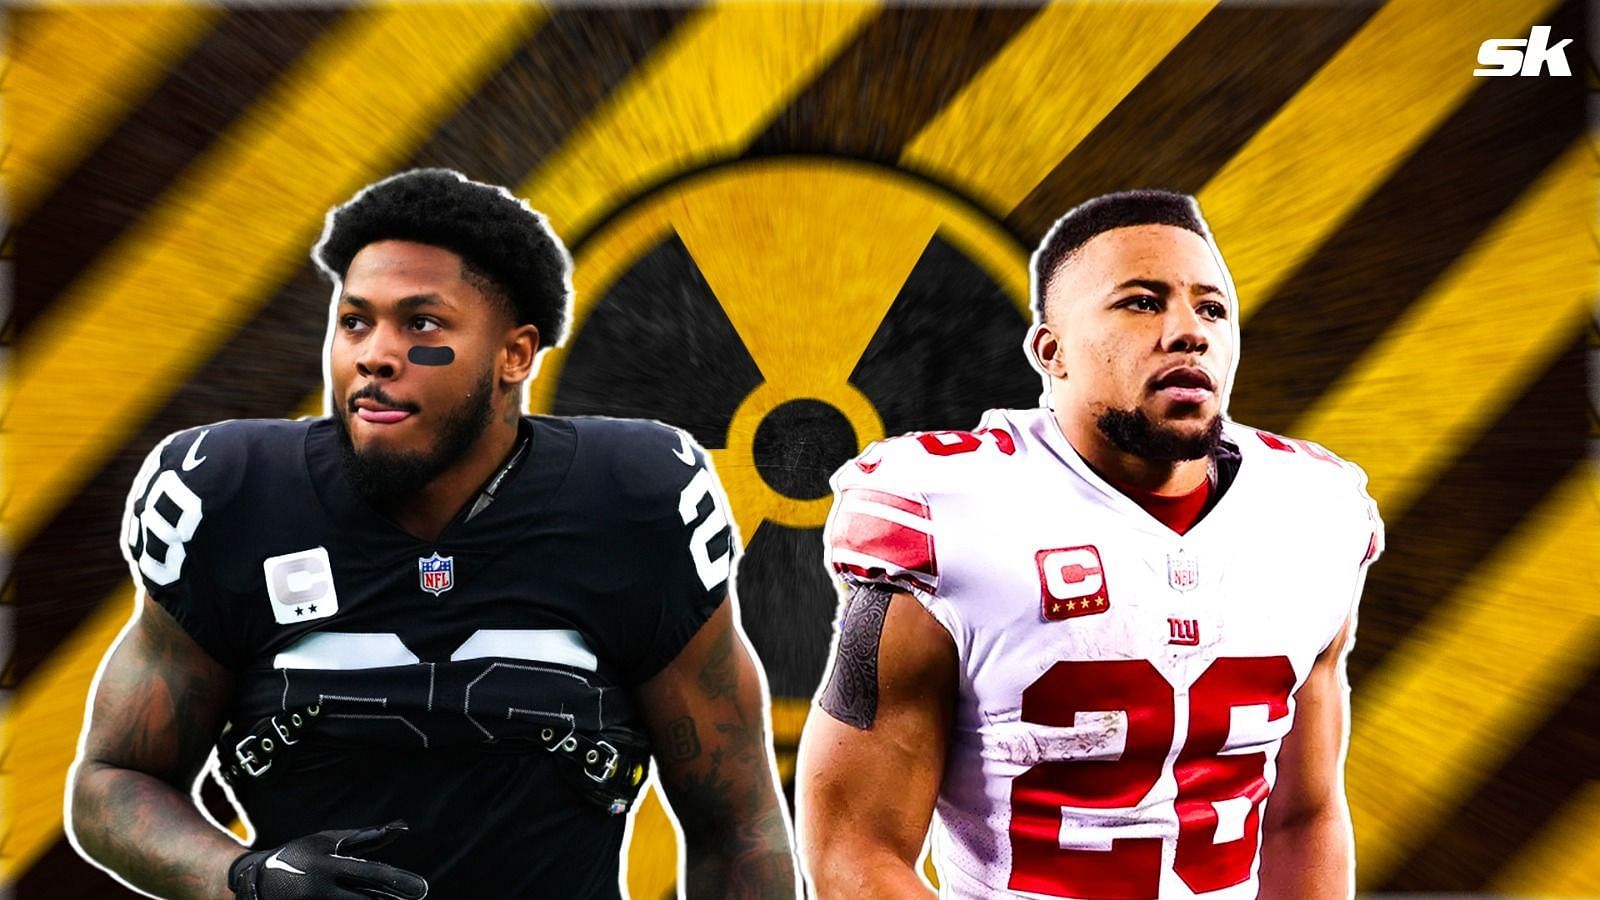 Saquon Barkley and Josh Jacobs did not sign long-term deals